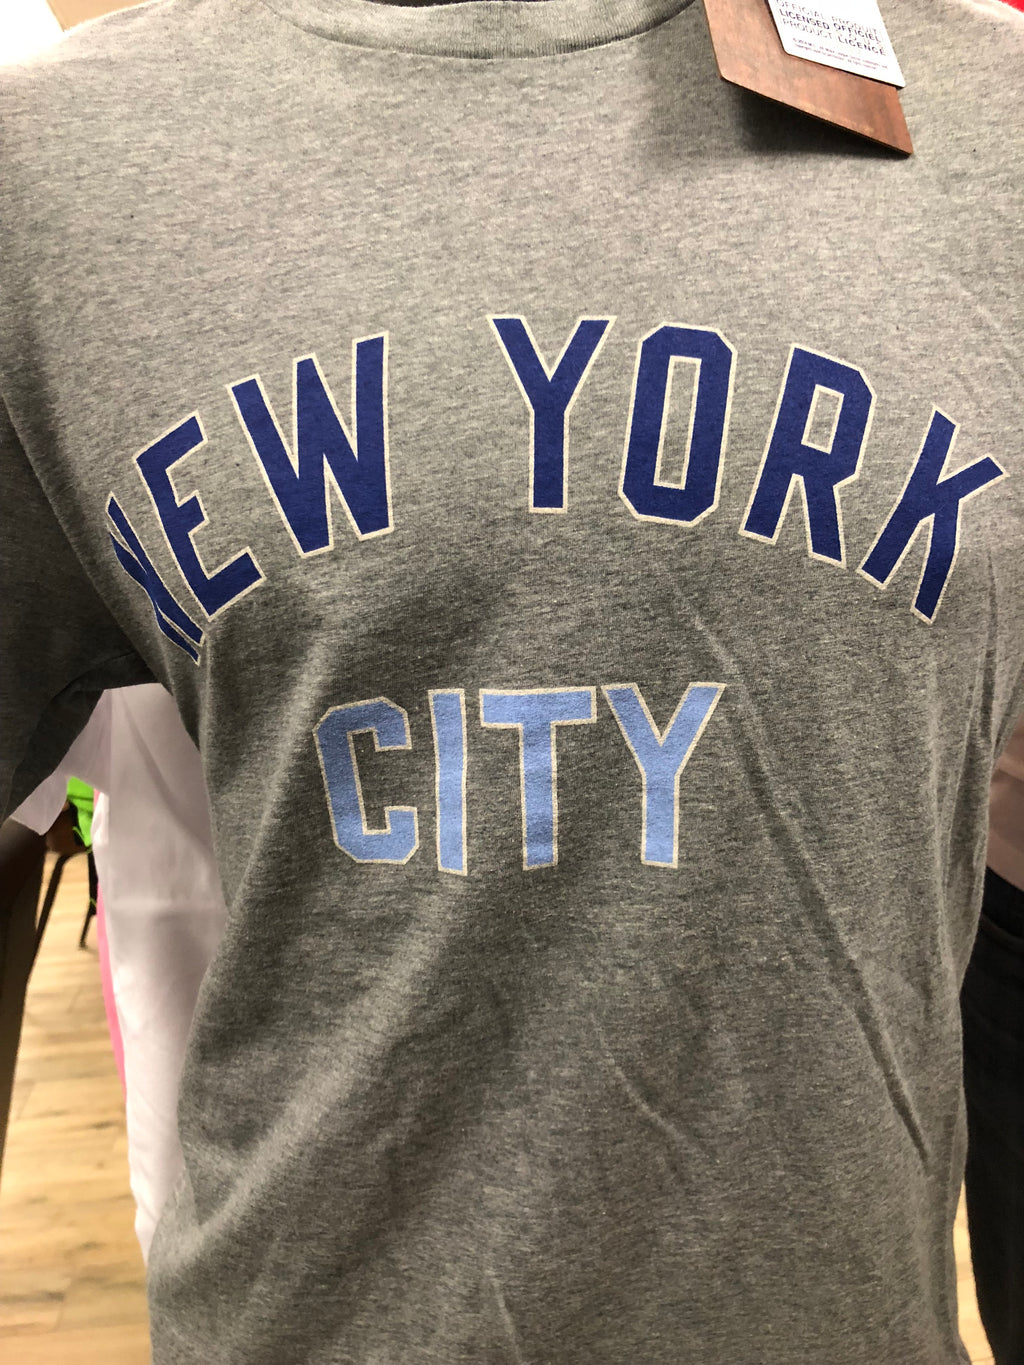 NEW YORK CITY FC Outfield Player Tee - ITA Sports Shop